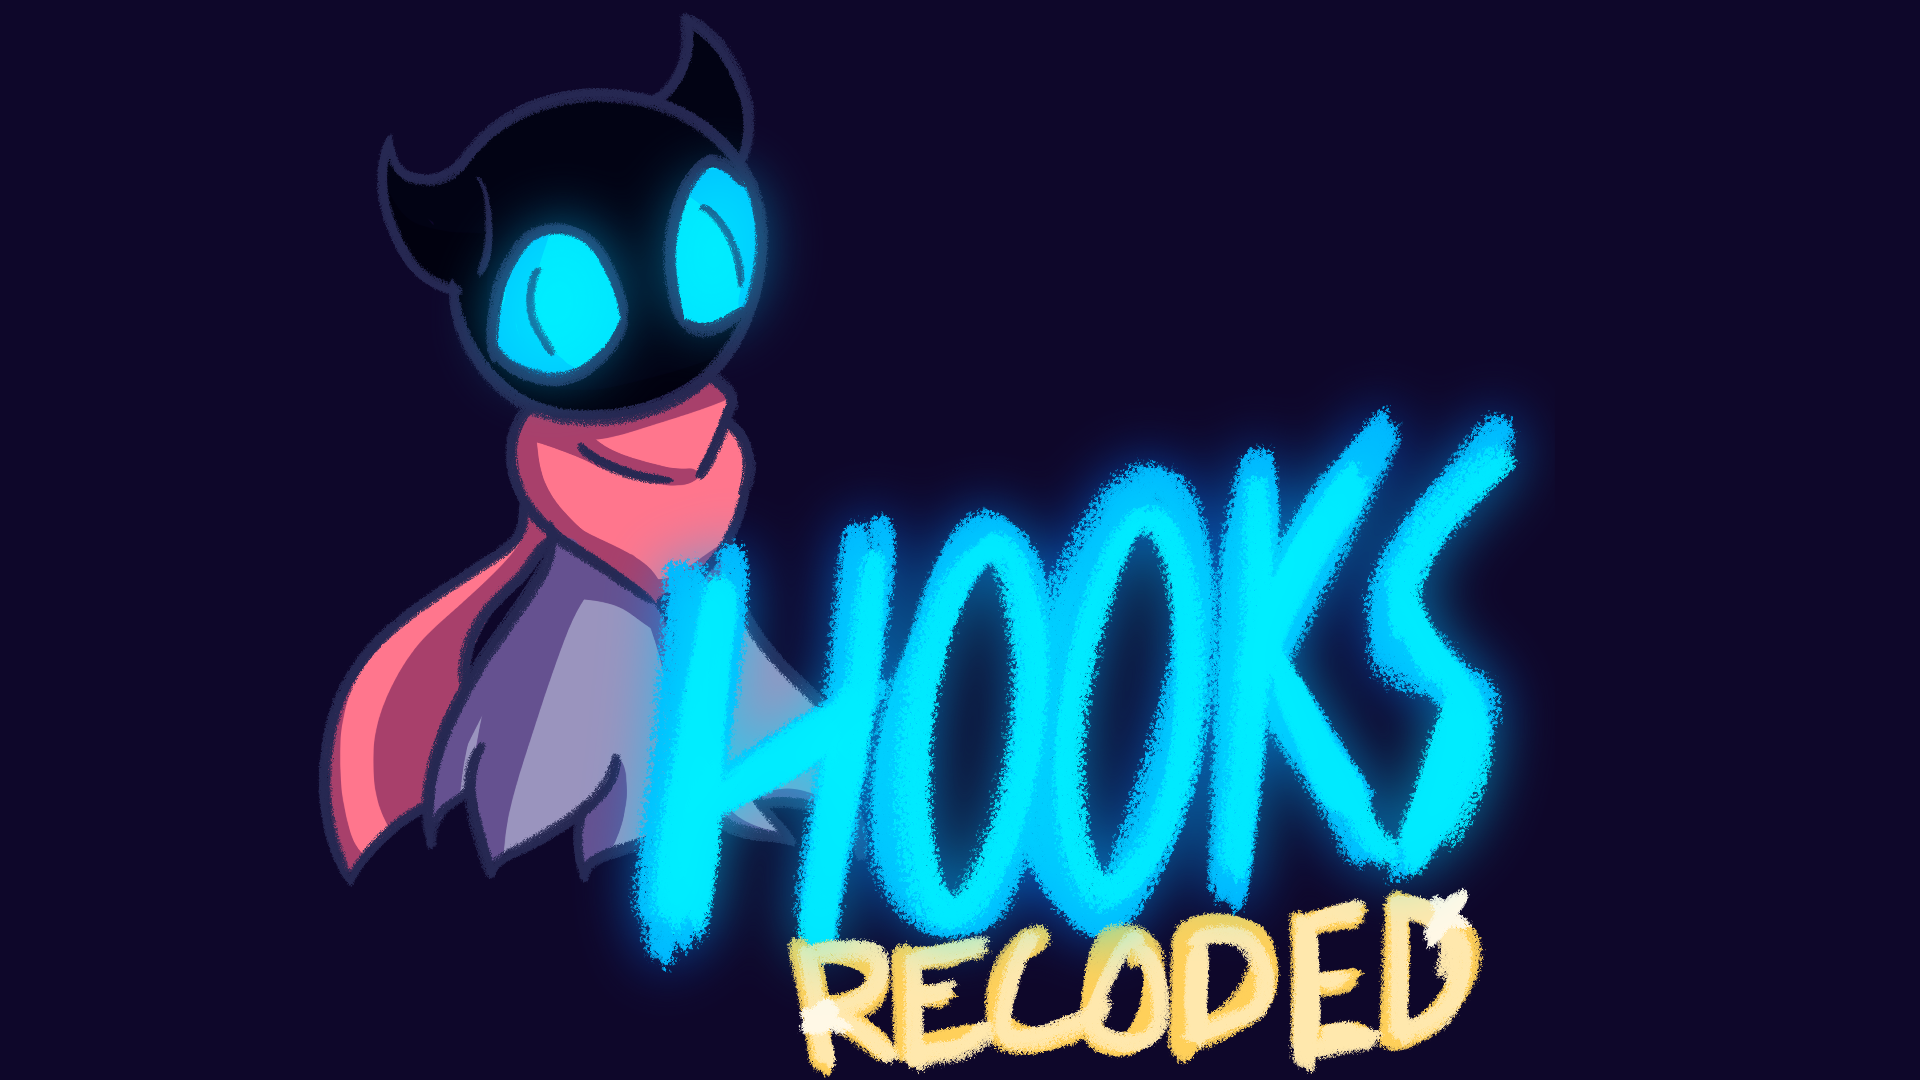 Hooks Recoded